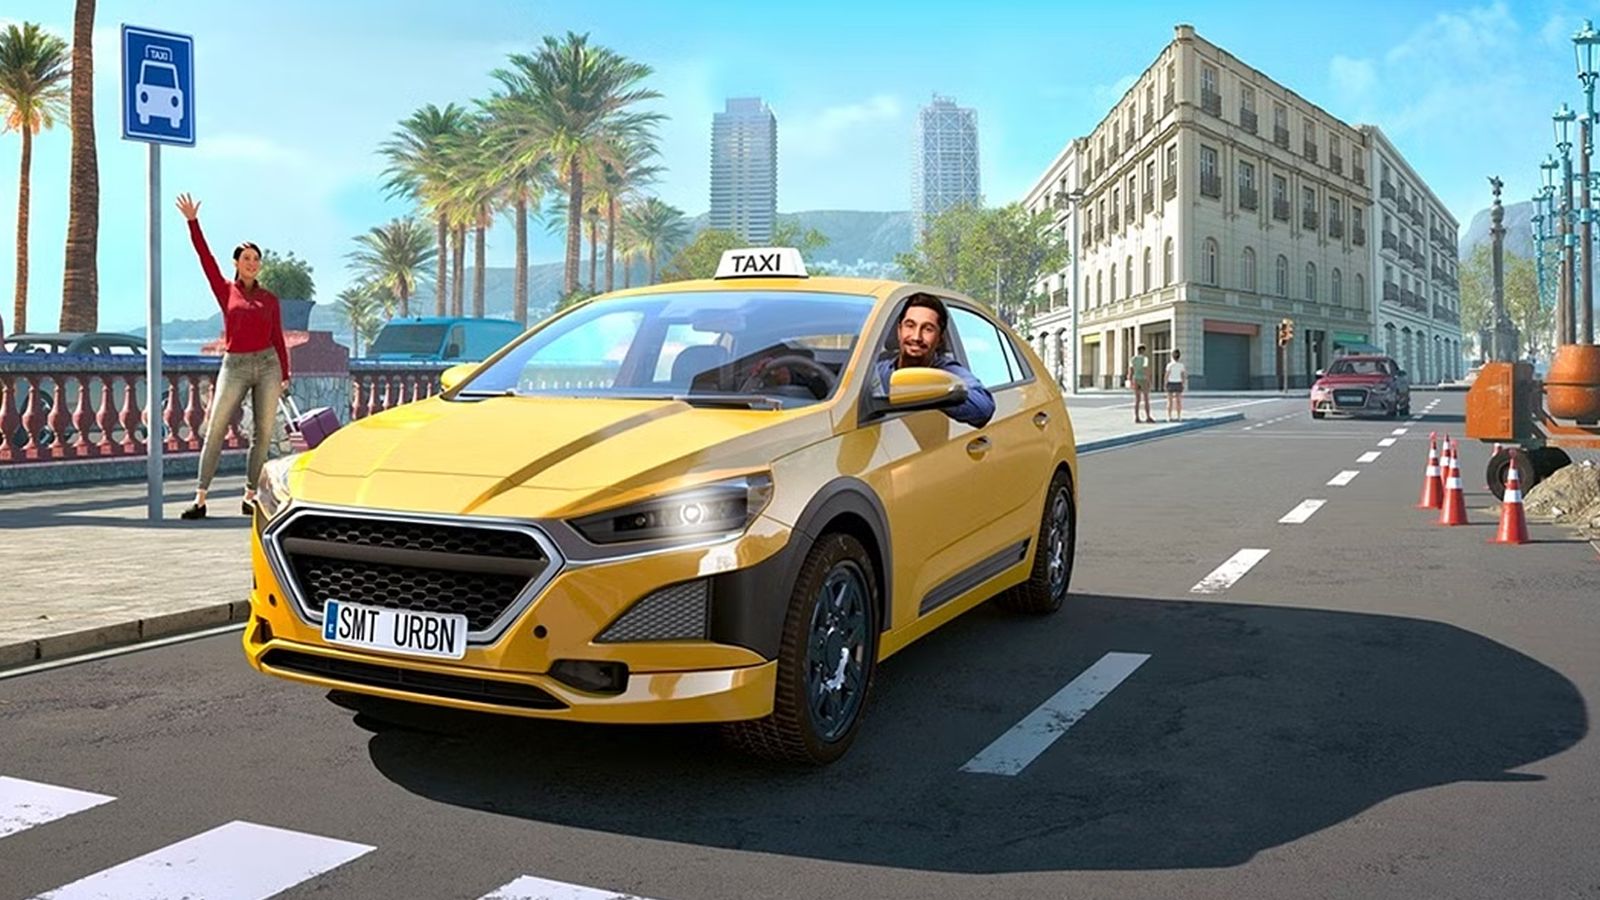 Taxi Life: A Taxi Driving Simulator everything you need to know